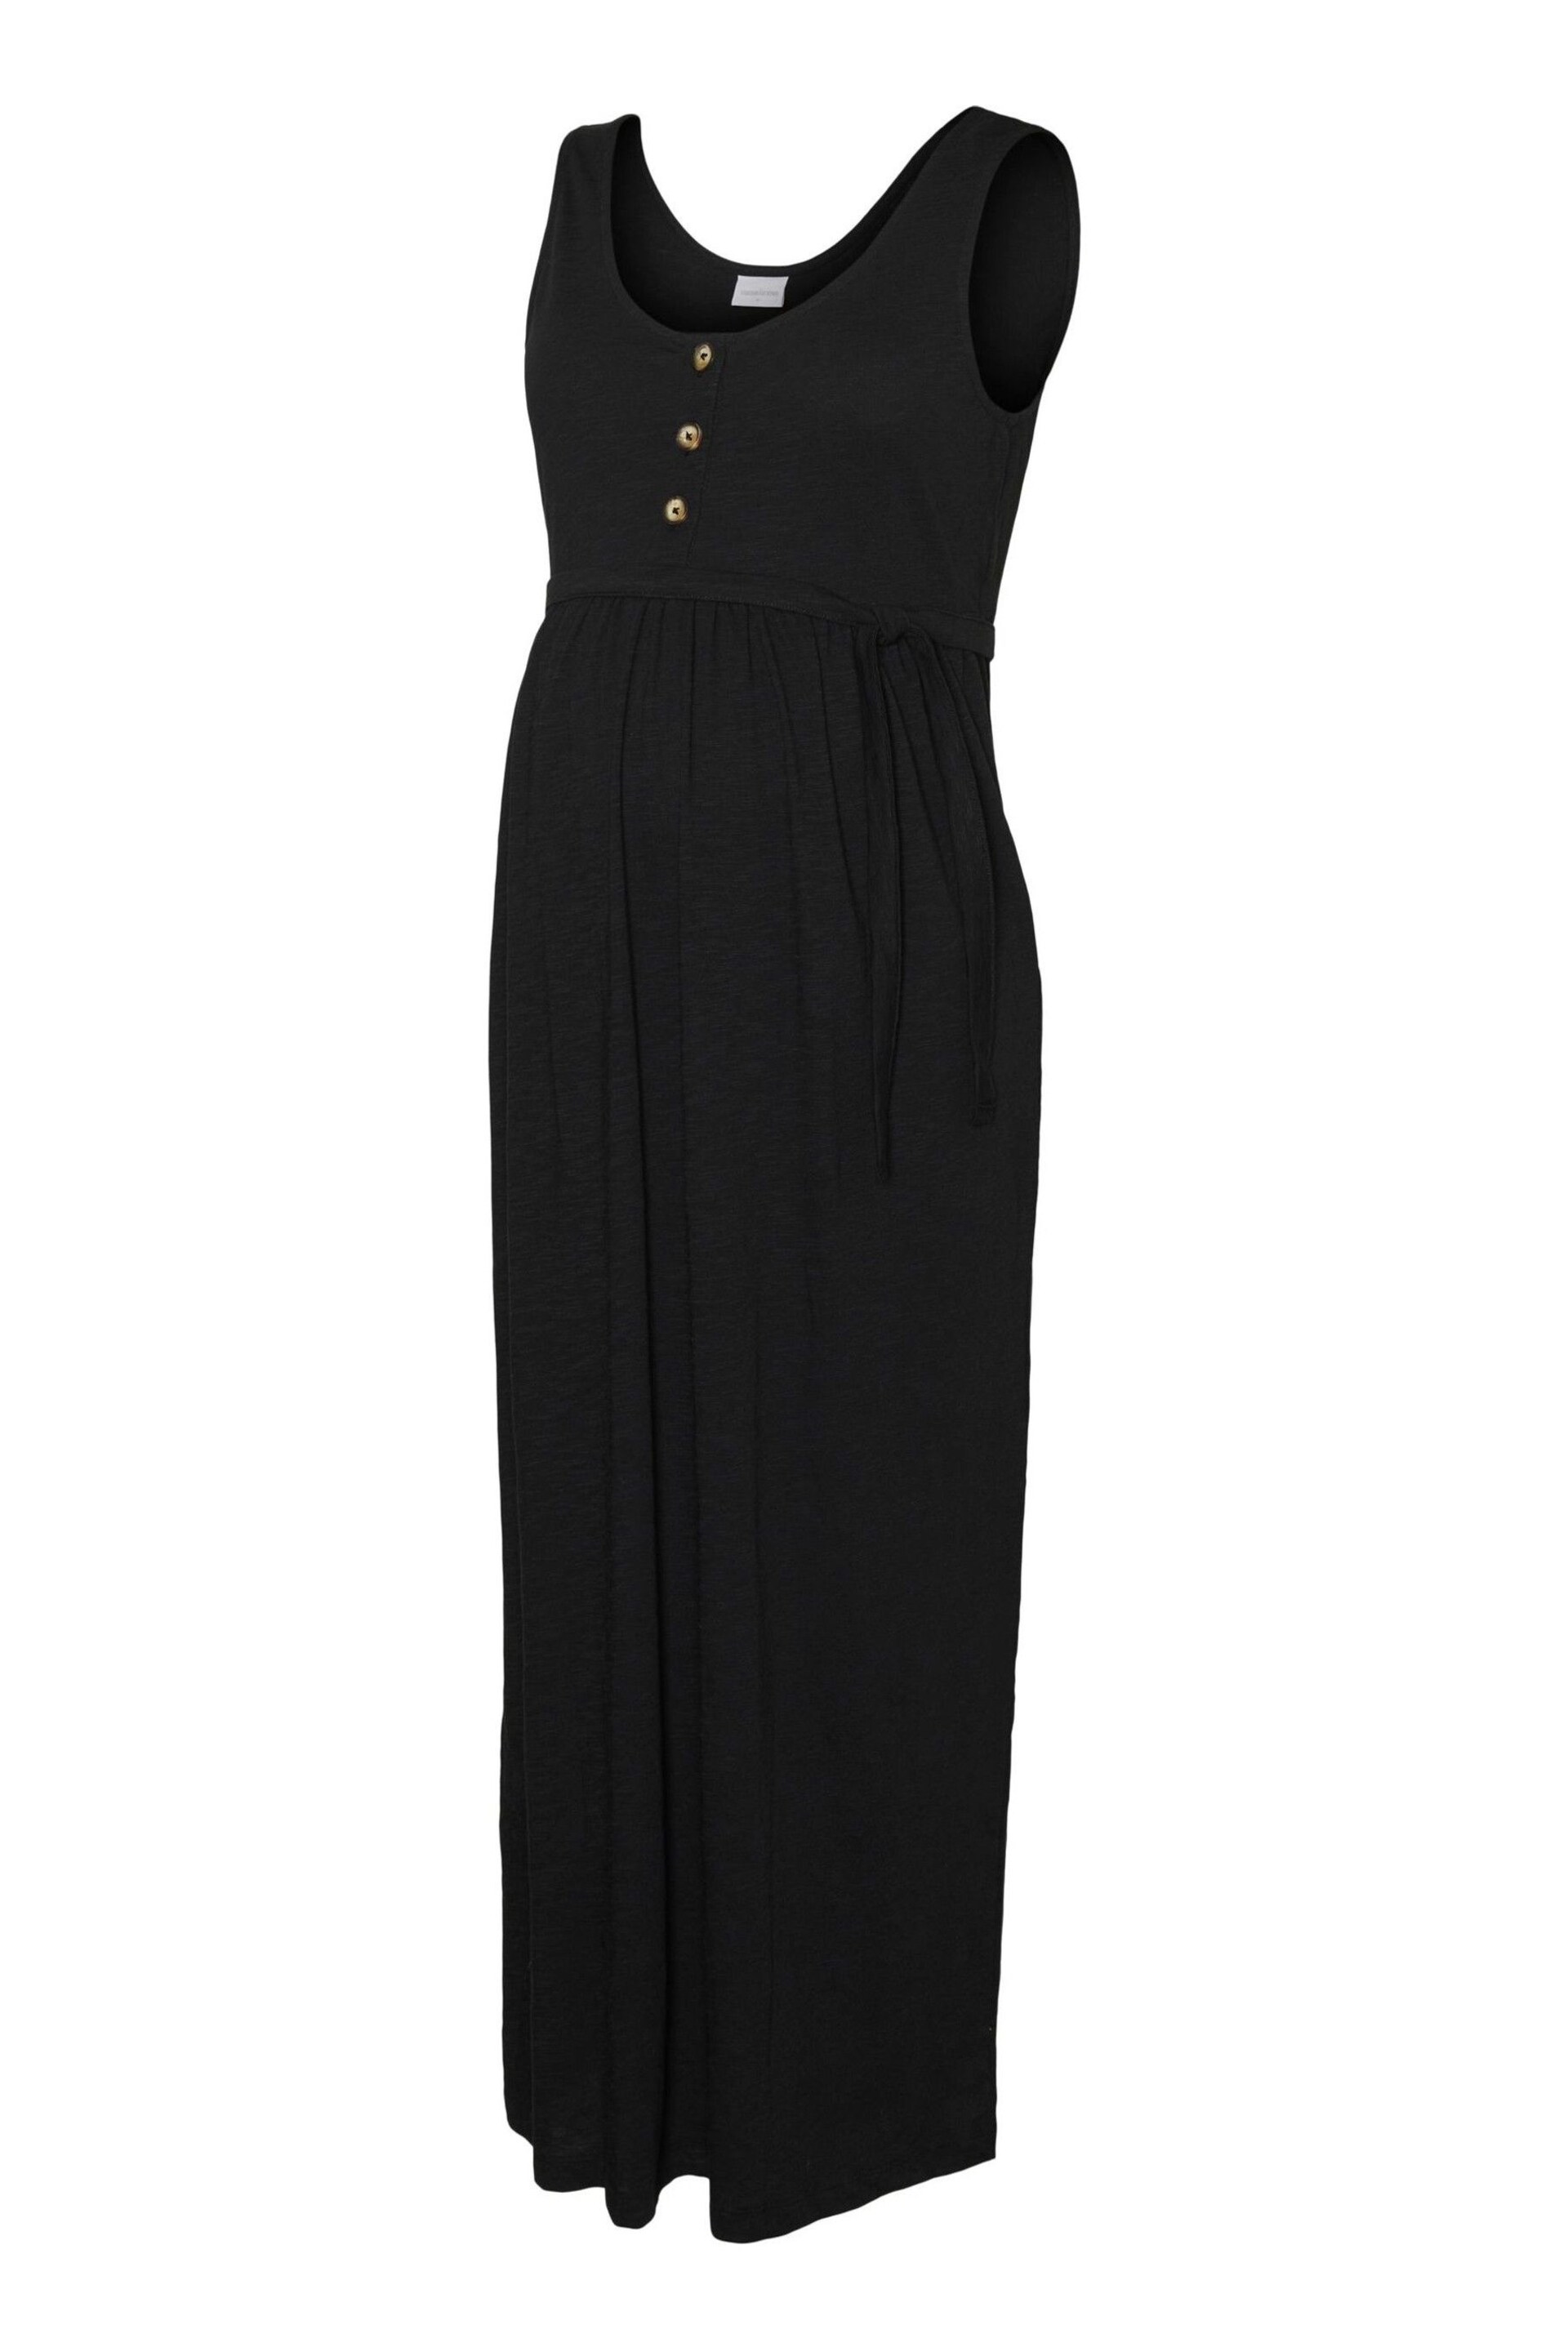 Mamalicious Black Maternity Button Front Maxi Dress With Nursing Function - Image 5 of 5